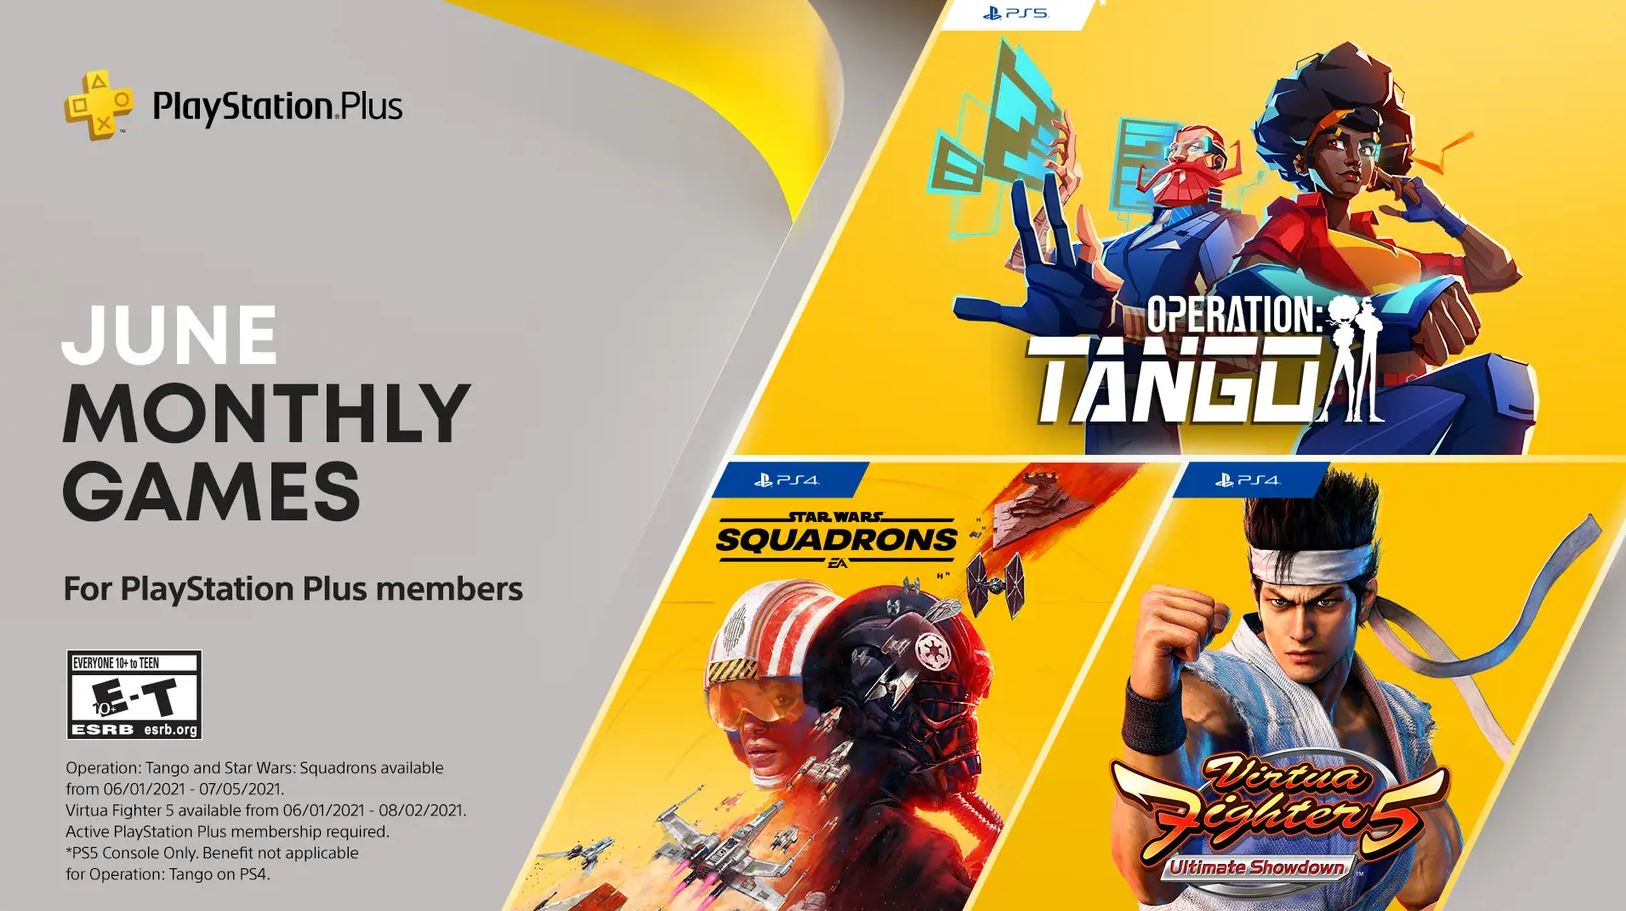 PlayStation Plus PS4, PS5 Free Games June 2021 Now Available - PlayStation